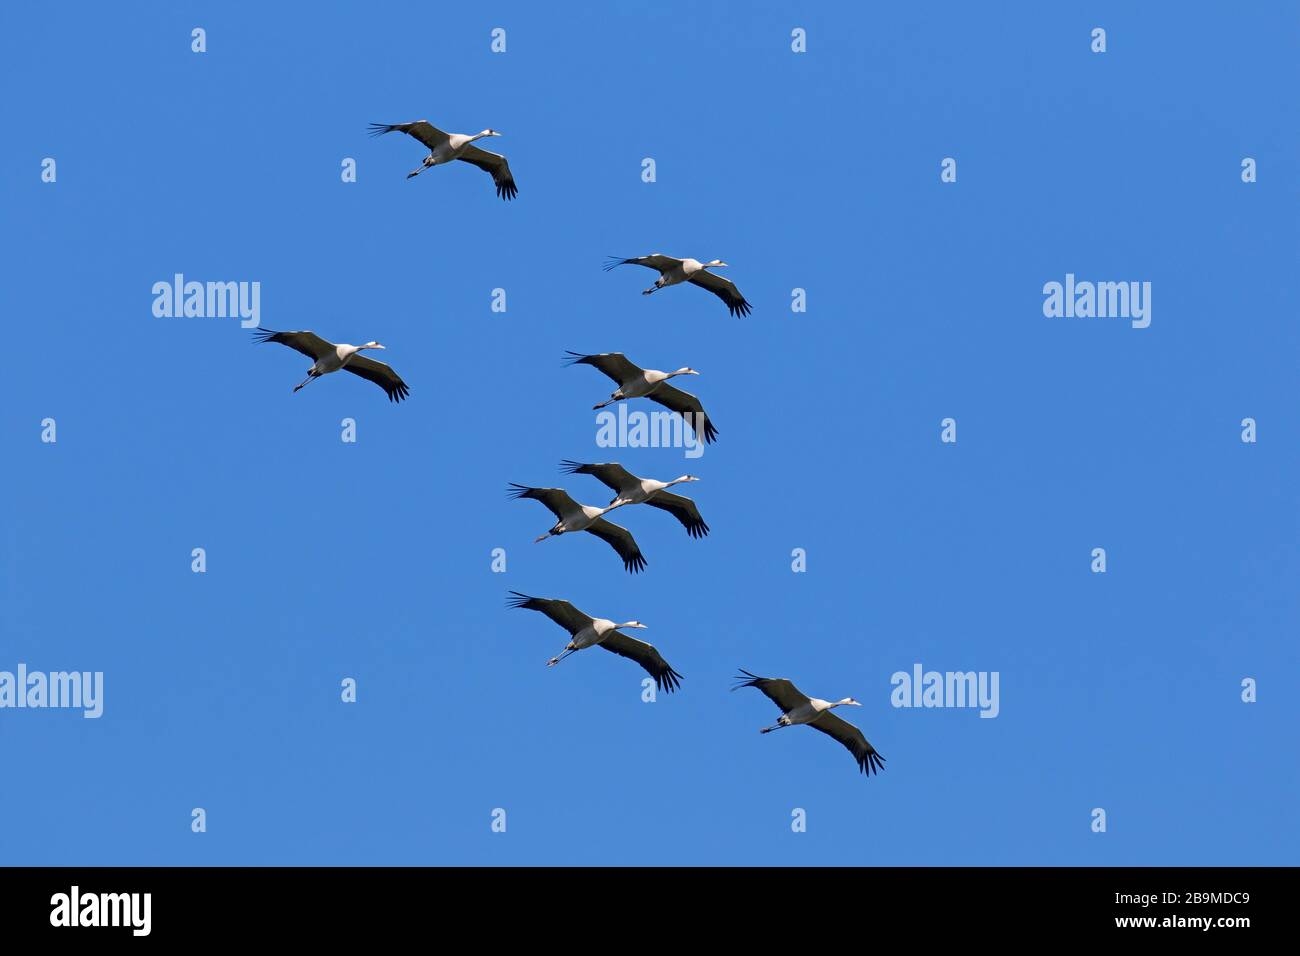 Migrating flock of common cranes / Eurasian crane (Grus grus) flying / thermal soaring against blue sky during migration Stock Photo